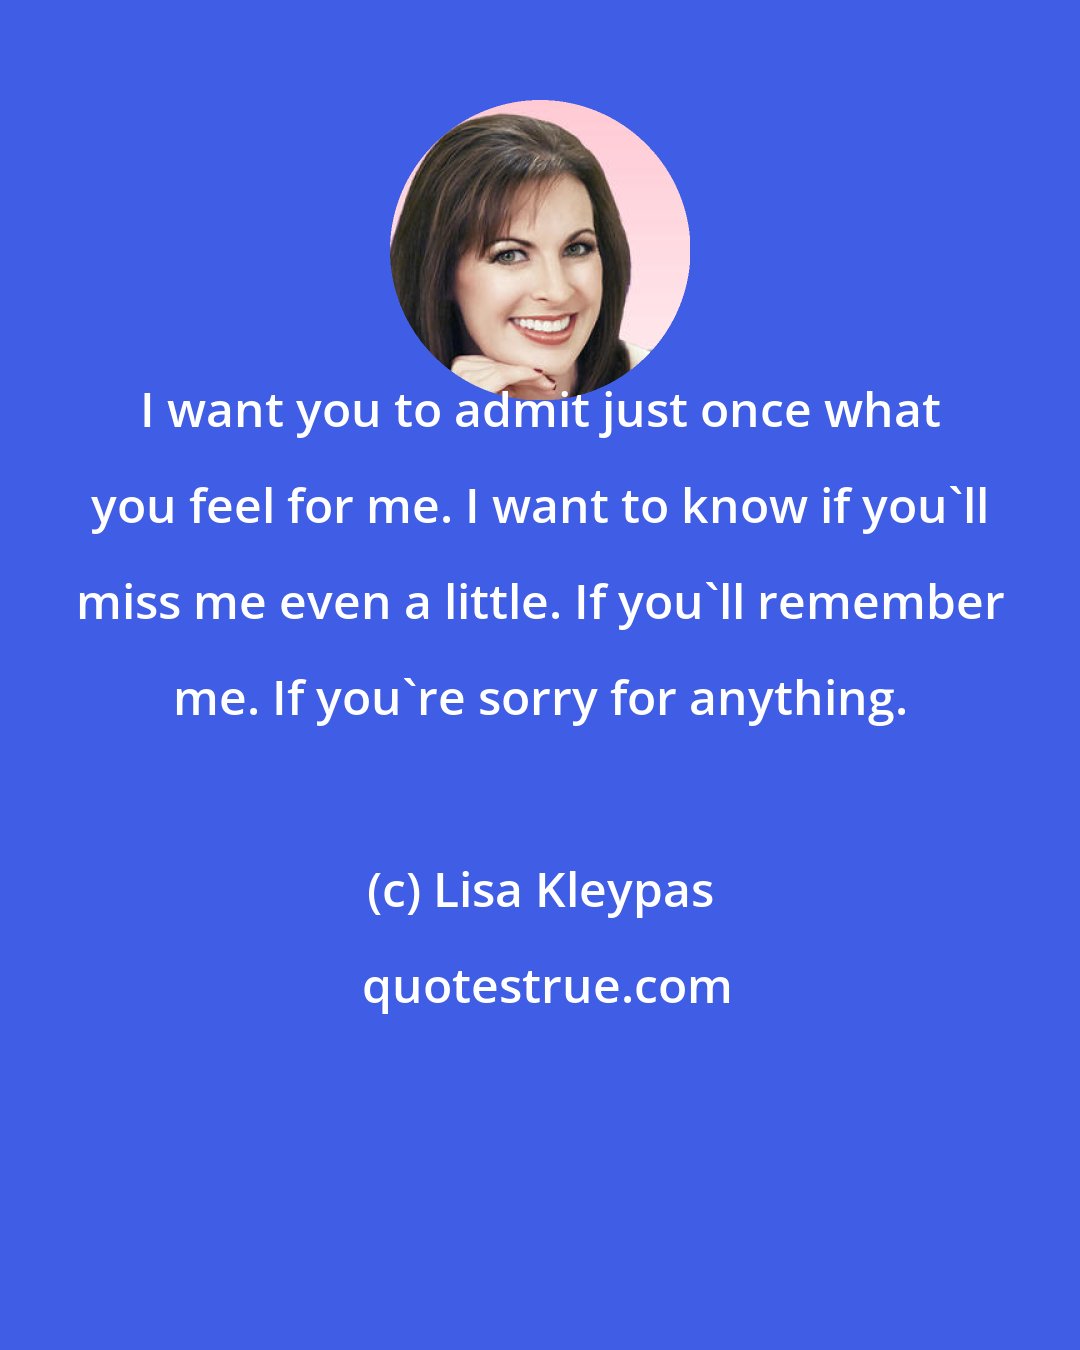 Lisa Kleypas: I want you to admit just once what you feel for me. I want to know if you'll miss me even a little. If you'll remember me. If you're sorry for anything.